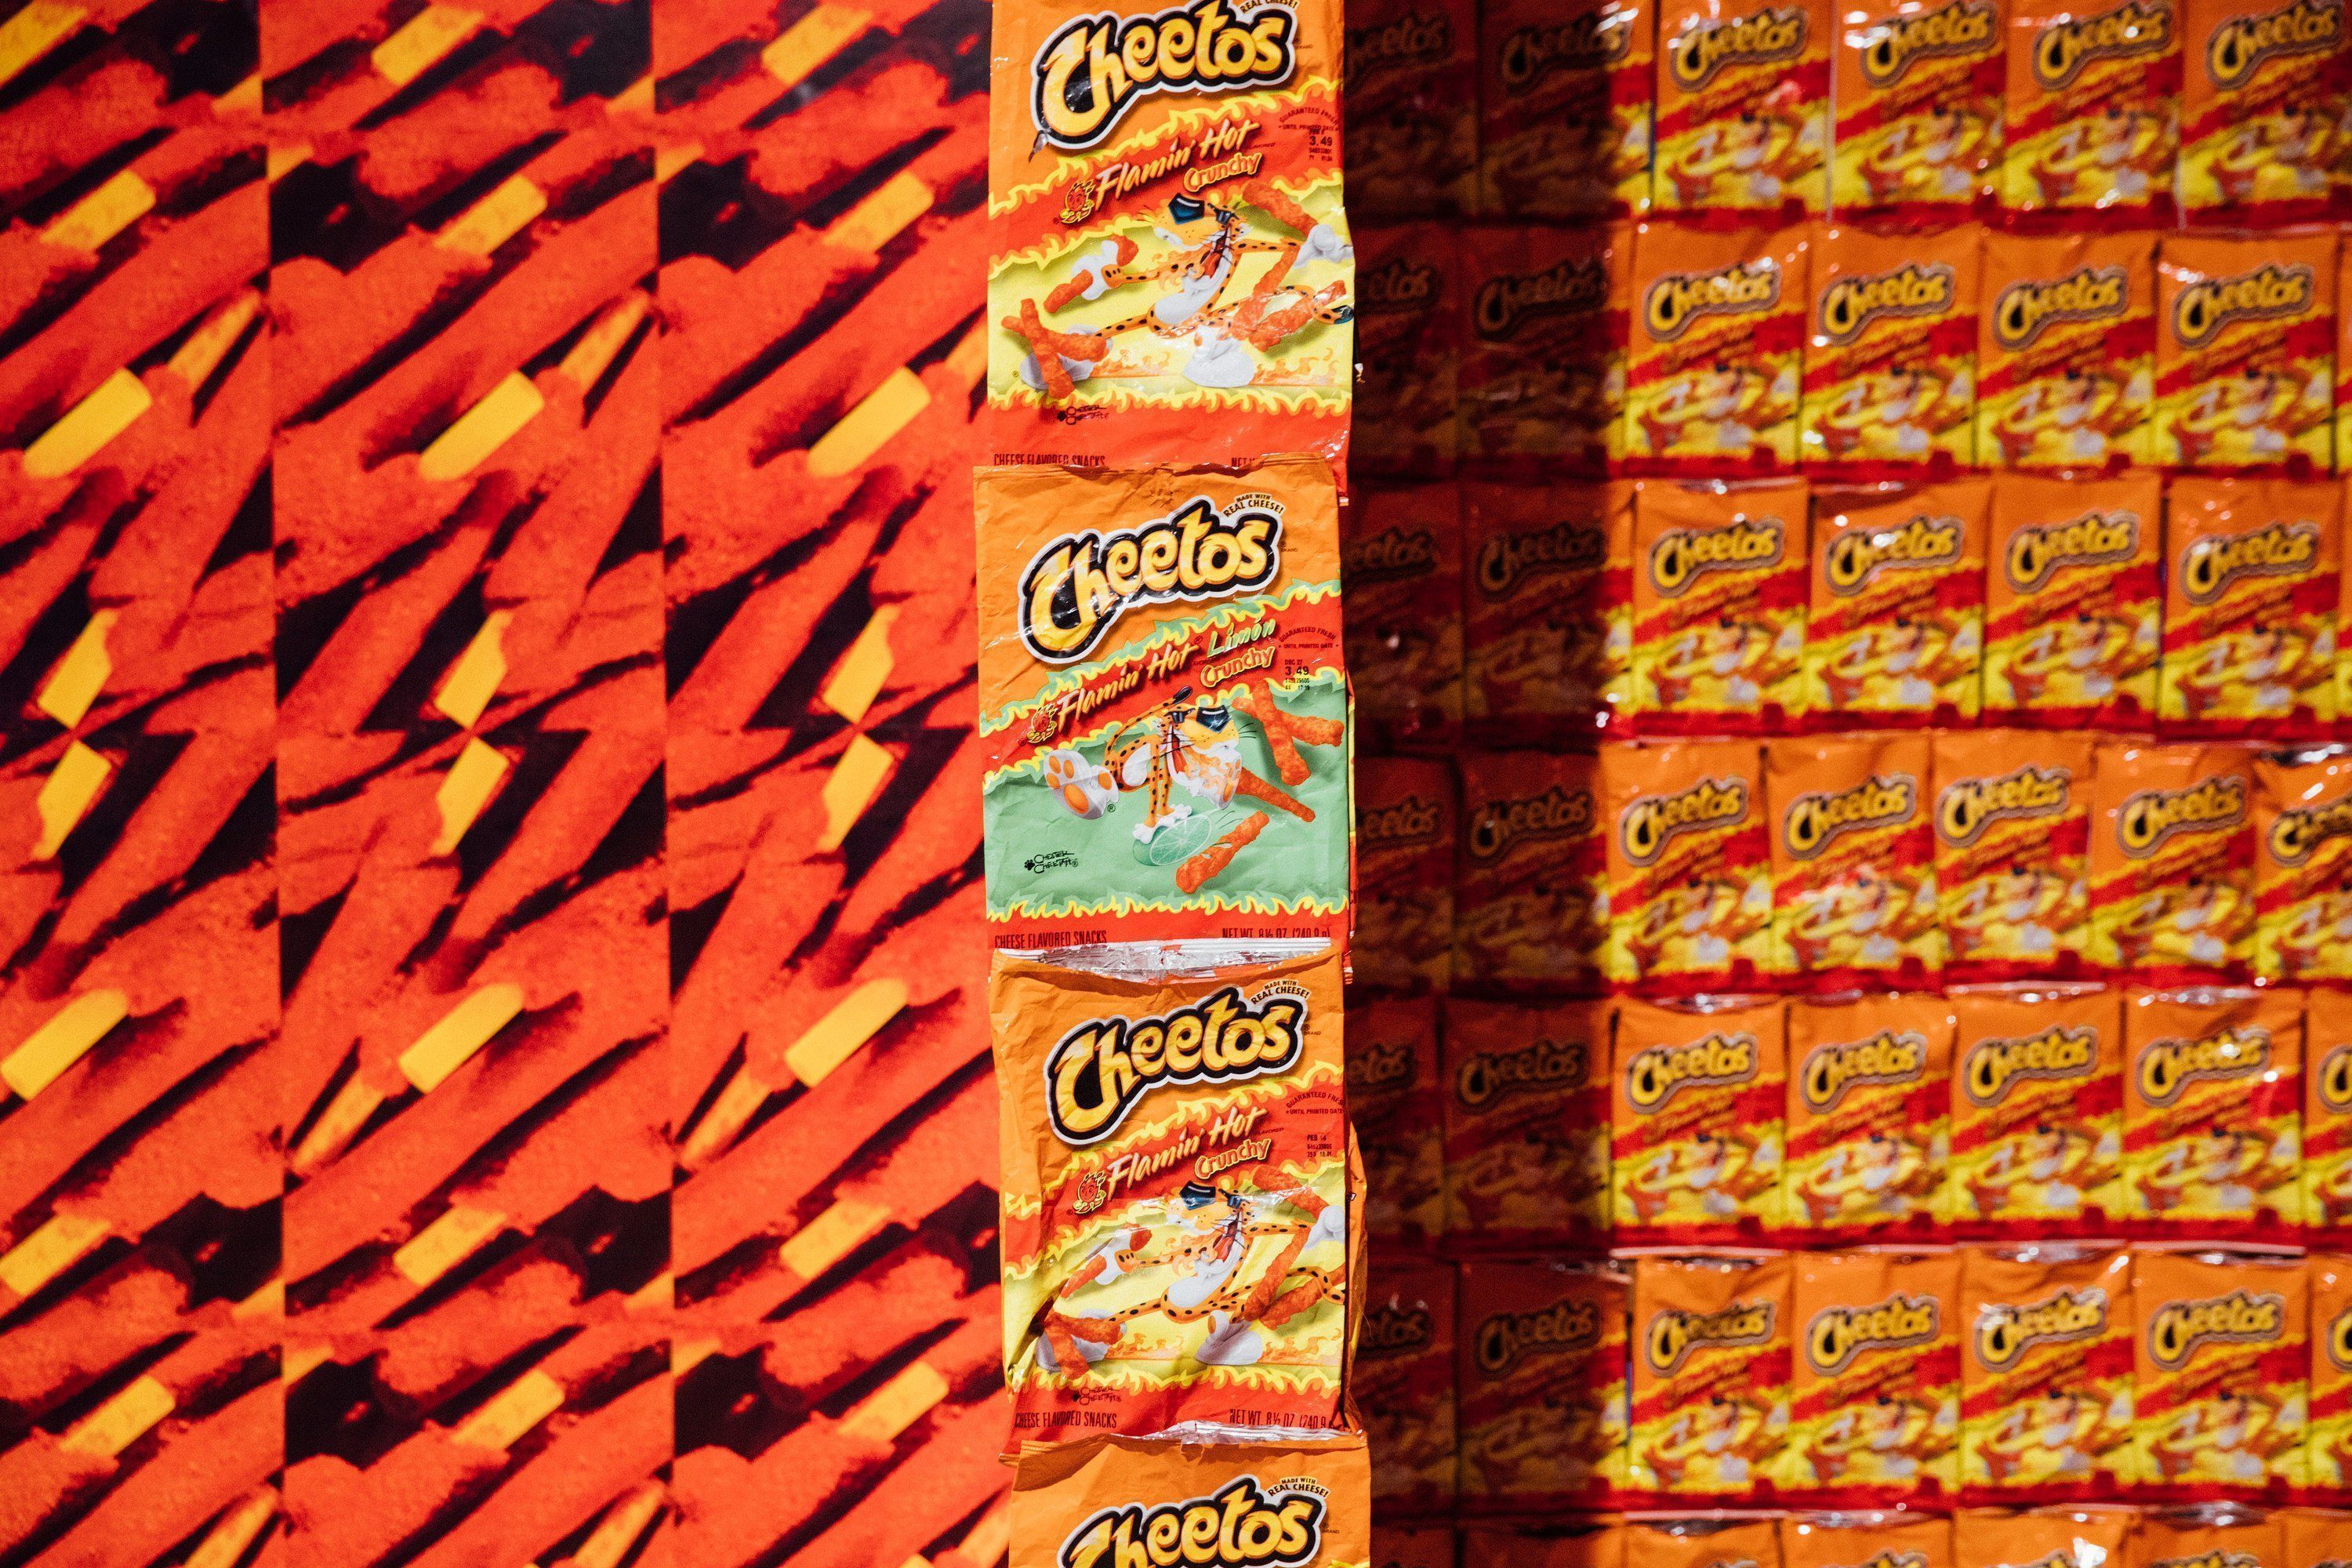 Cheetos snack bags are stacked on top of each other. - Cheetos